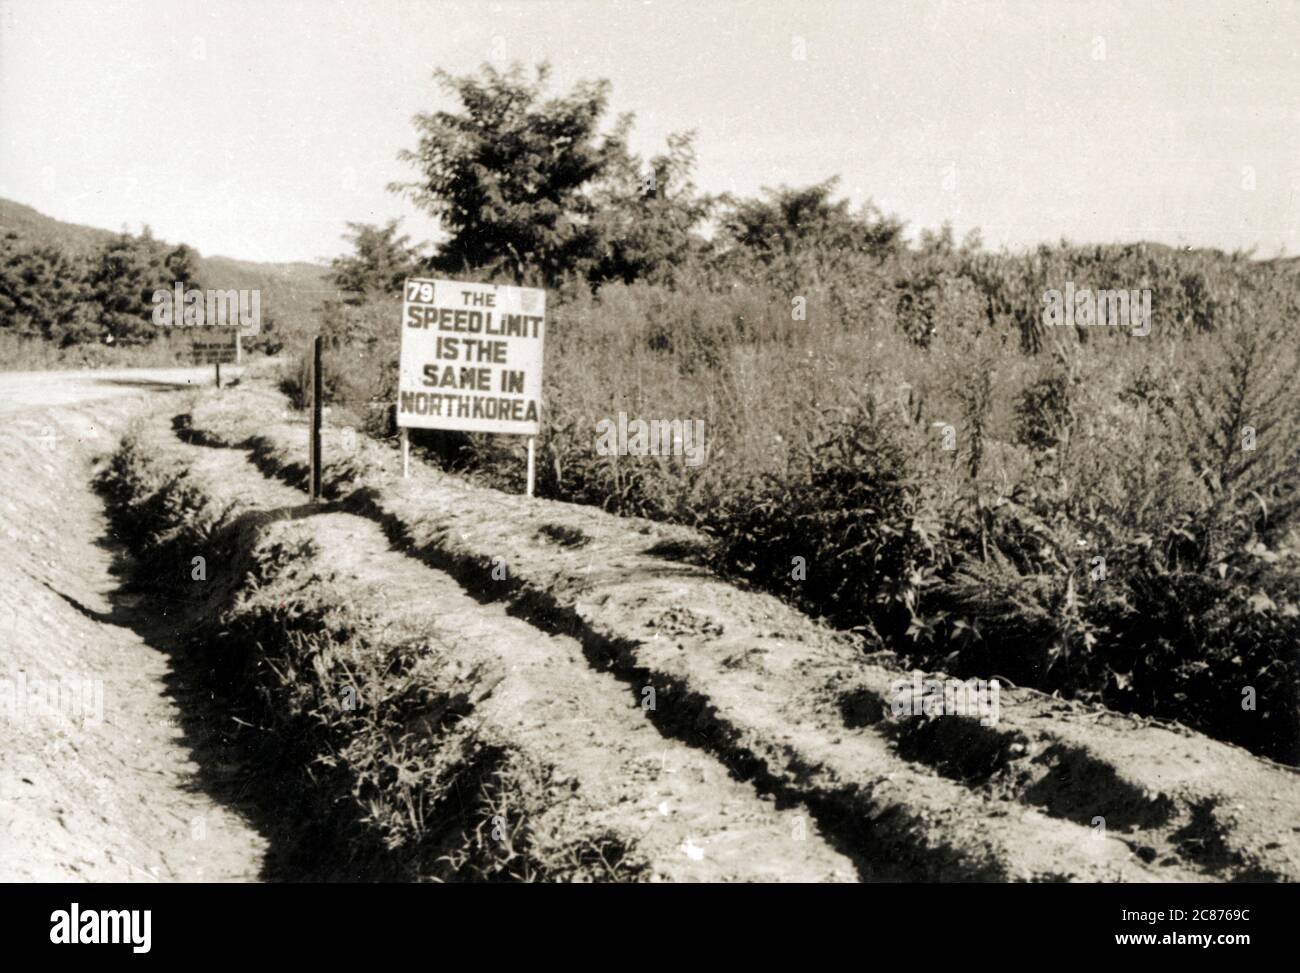 Korean War era - Speed Limit sign close to the 38th parallel north, which formed the border between North and South Korea prior to the Korean War. Stock Photo